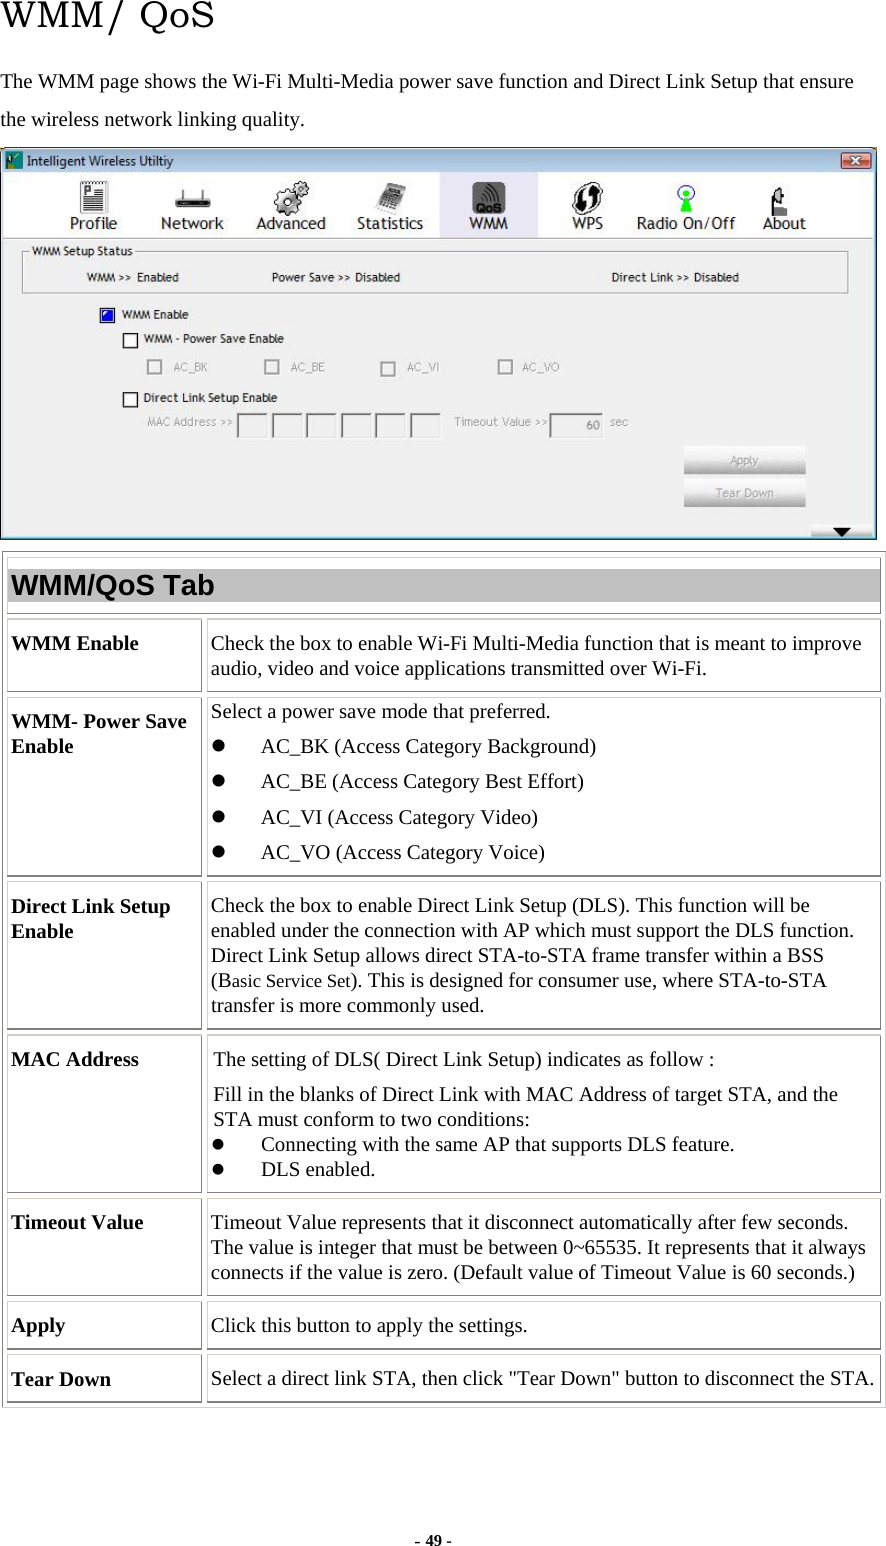  - 49 - WMM/ QoS The WMM page shows the Wi-Fi Multi-Media power save function and Direct Link Setup that ensure the wireless network linking quality.  WMM/QoS Tab WMM Enable  Check the box to enable Wi-Fi Multi-Media function that is meant to improve audio, video and voice applications transmitted over Wi-Fi. WMM- Power Save Enable Select a power save mode that preferred.   AC_BK (Access Category Background)   AC_BE (Access Category Best Effort)   AC_VI (Access Category Video)   AC_VO (Access Category Voice) Direct Link Setup Enable  Check the box to enable Direct Link Setup (DLS). This function will be enabled under the connection with AP which must support the DLS function. Direct Link Setup allows direct STA-to-STA frame transfer within a BSS (Basic Service Set). This is designed for consumer use, where STA-to-STA transfer is more commonly used. MAC Address  The setting of DLS( Direct Link Setup) indicates as follow : Fill in the blanks of Direct Link with MAC Address of target STA, and the STA must conform to two conditions:   Connecting with the same AP that supports DLS feature.   DLS enabled. Timeout Value  Timeout Value represents that it disconnect automatically after few seconds. The value is integer that must be between 0~65535. It represents that it always connects if the value is zero. (Default value of Timeout Value is 60 seconds.) Apply  Click this button to apply the settings. Tear Down  Select a direct link STA, then click &quot;Tear Down&quot; button to disconnect the STA.